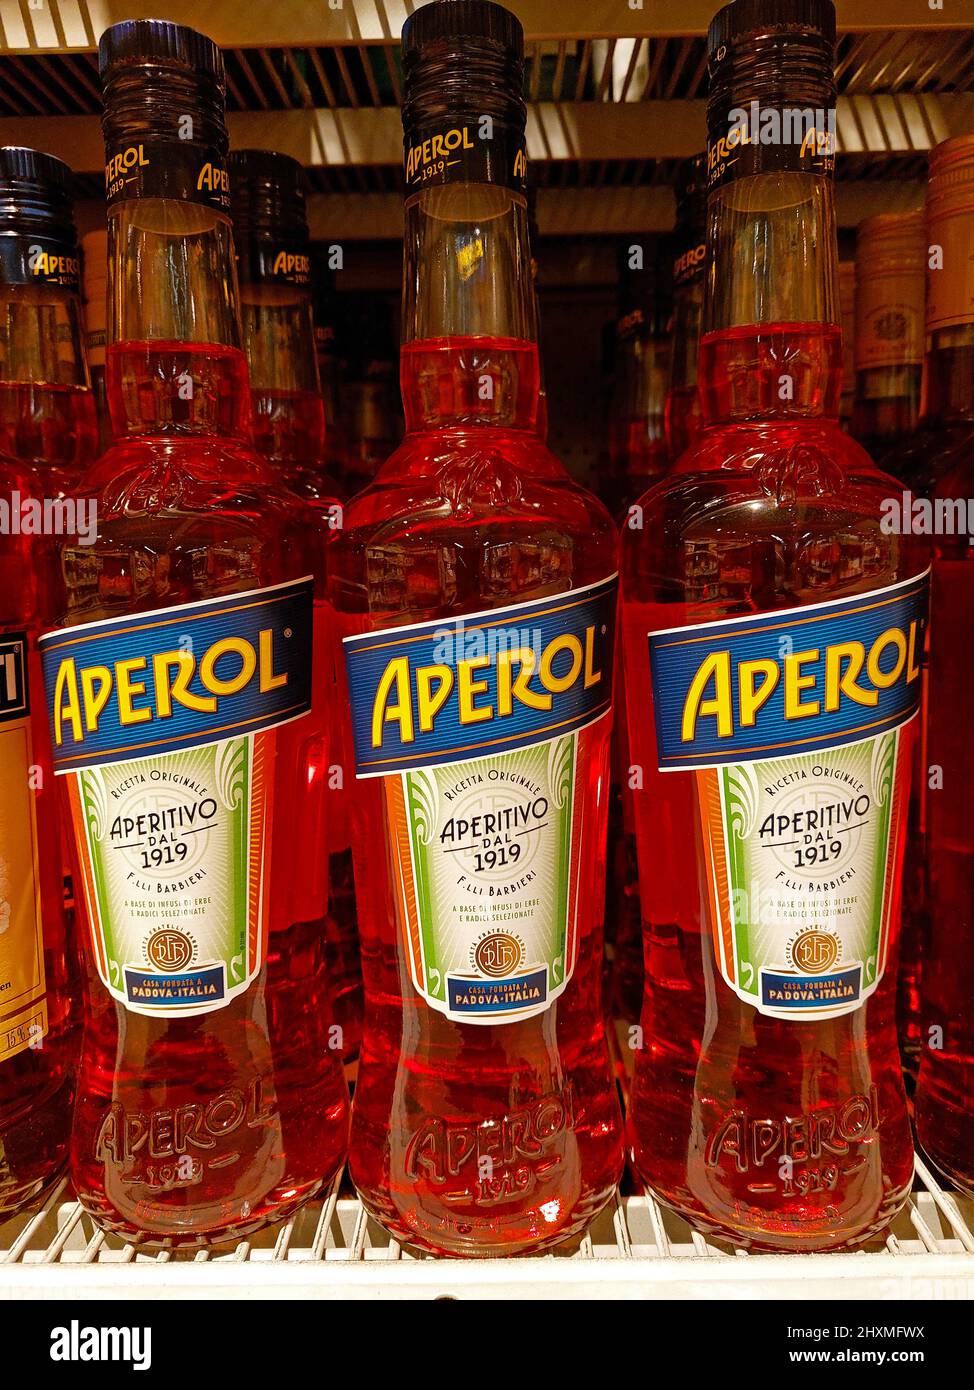 Aperol bottles in a supermarket Stock Photo